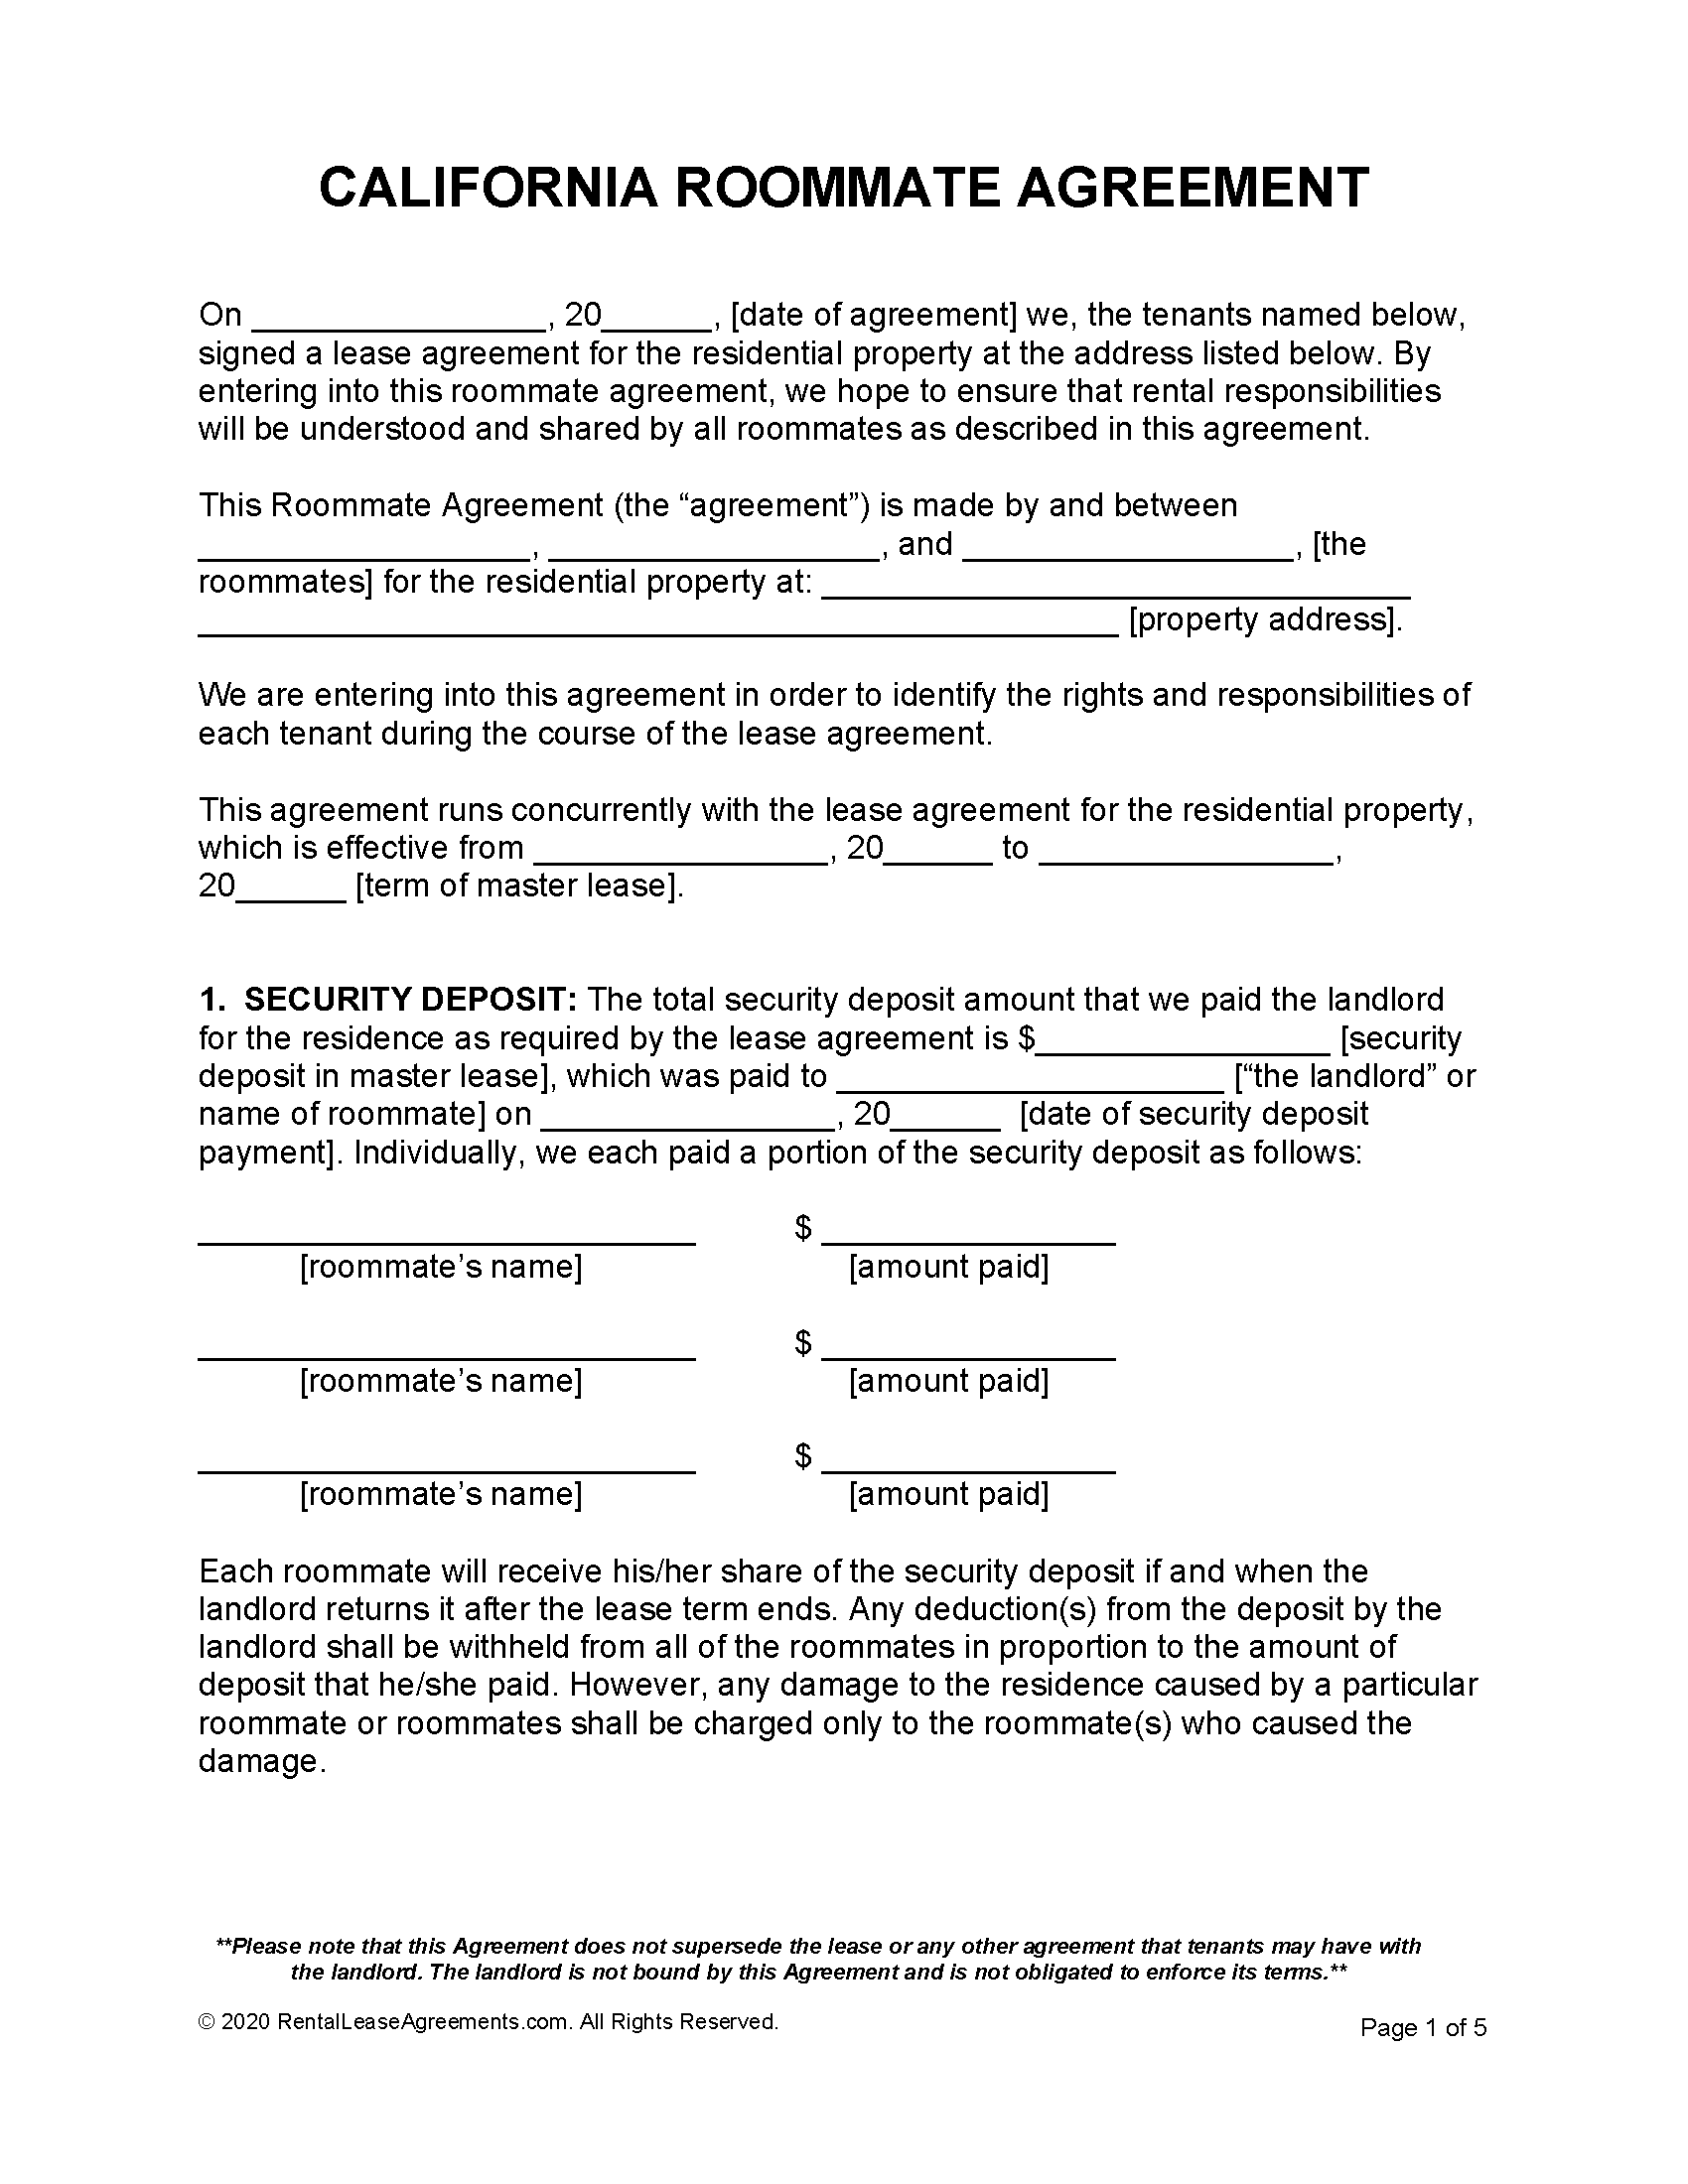 free-california-roommate-agreement-template-pdf-ms-word